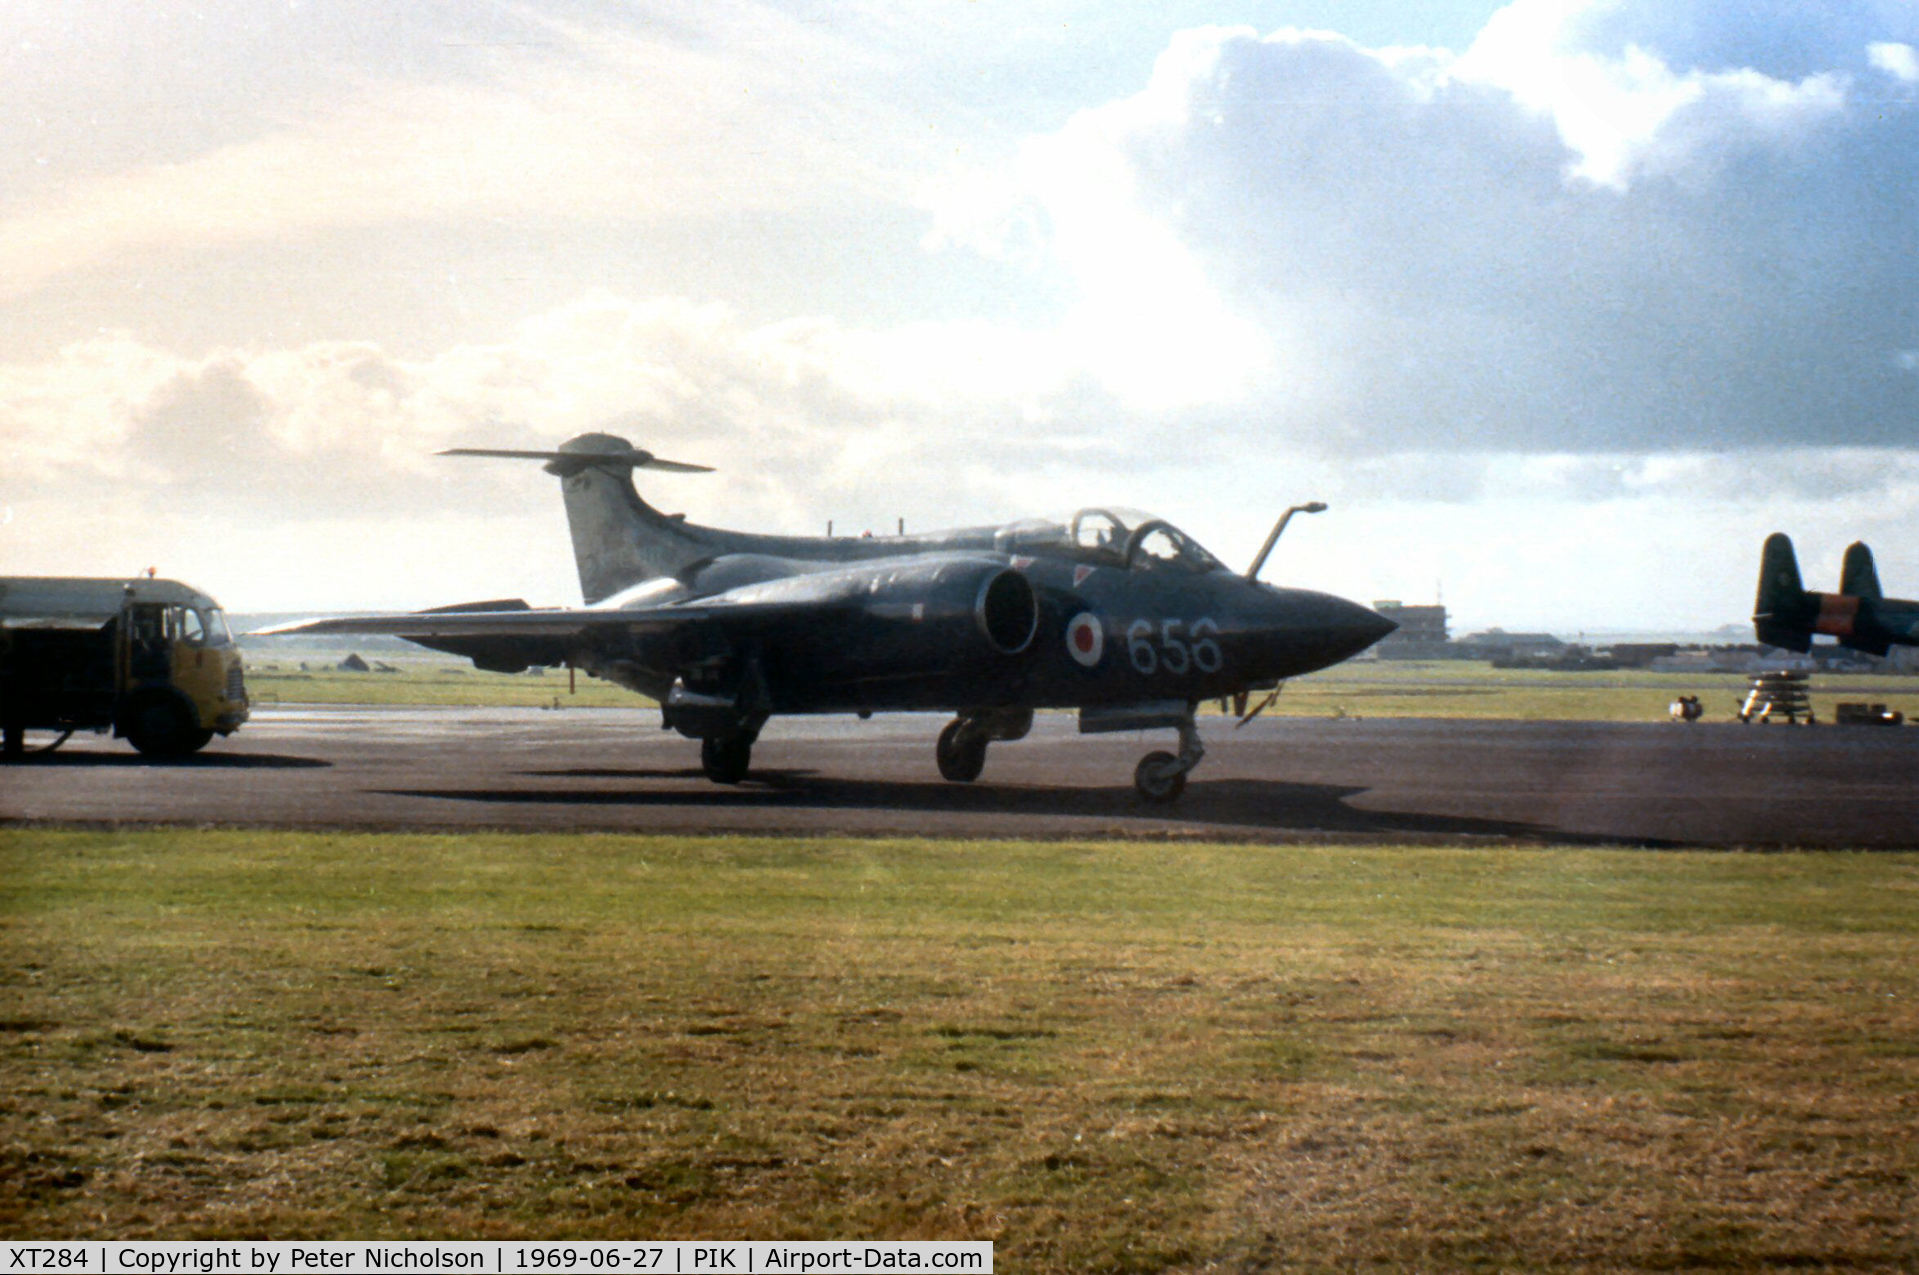 XT284, 1965 Hawker Siddeley Buccaneer S.2 C/N B3-06-65, Buccaneer S.2 of 736 Squadron at RNAS Lossiemouth on the flight-line at the 1969 Prestwick Airshow.